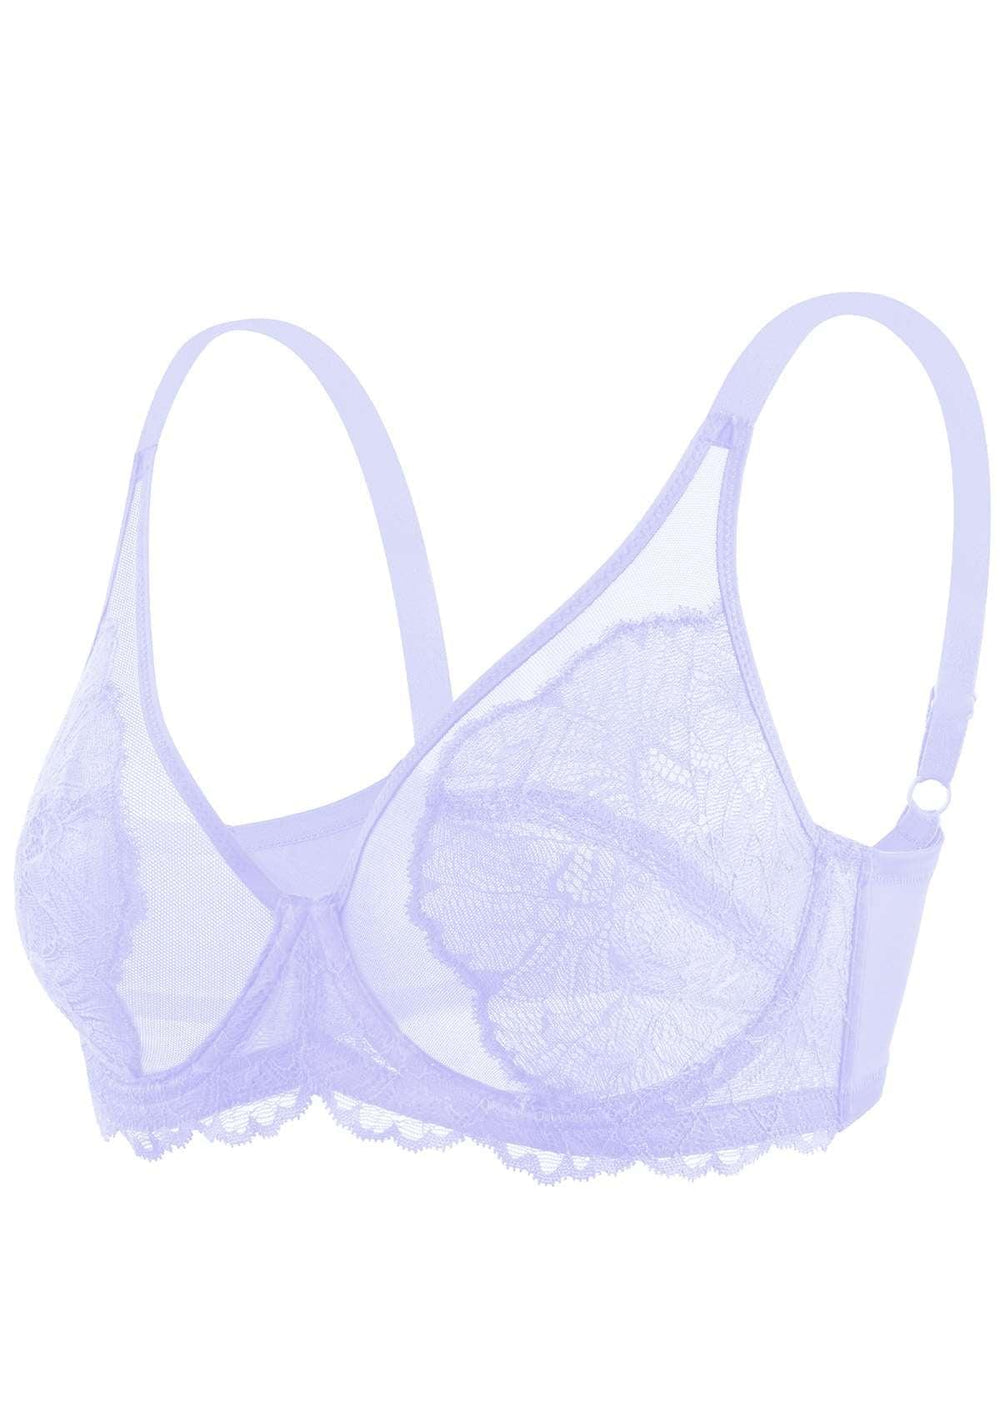 Buy HAWKESBURRY Women's Premium Lace - Padded - Non Wired - Full Coverage -  Blouse Design - Unique Bra & Panty Set - Purple (34B) at